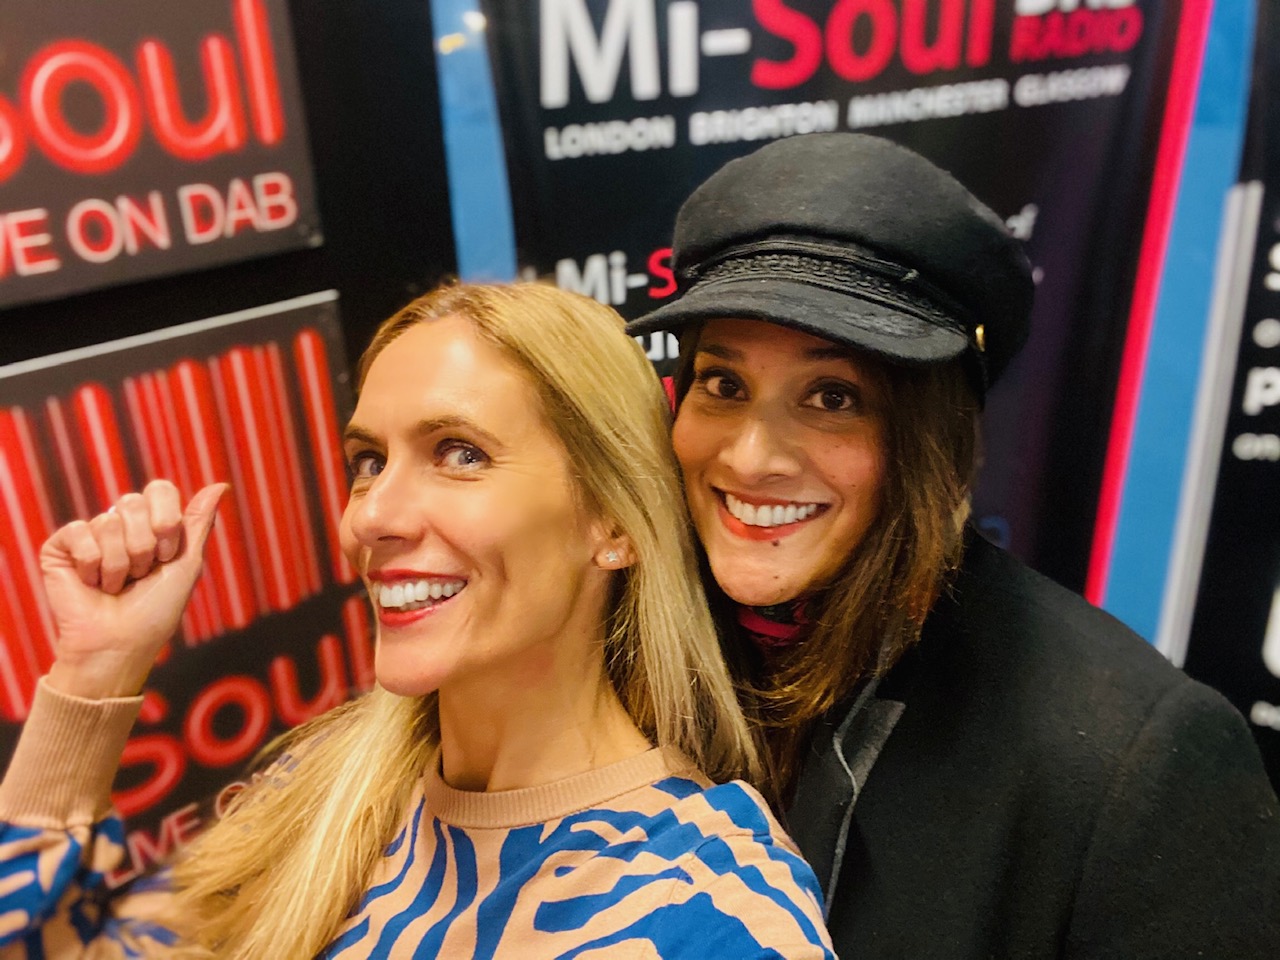 Fire up your Fridays as Janice Vee and Lorraine Ashdown are back with a weekly show on Mi-Soul Radio